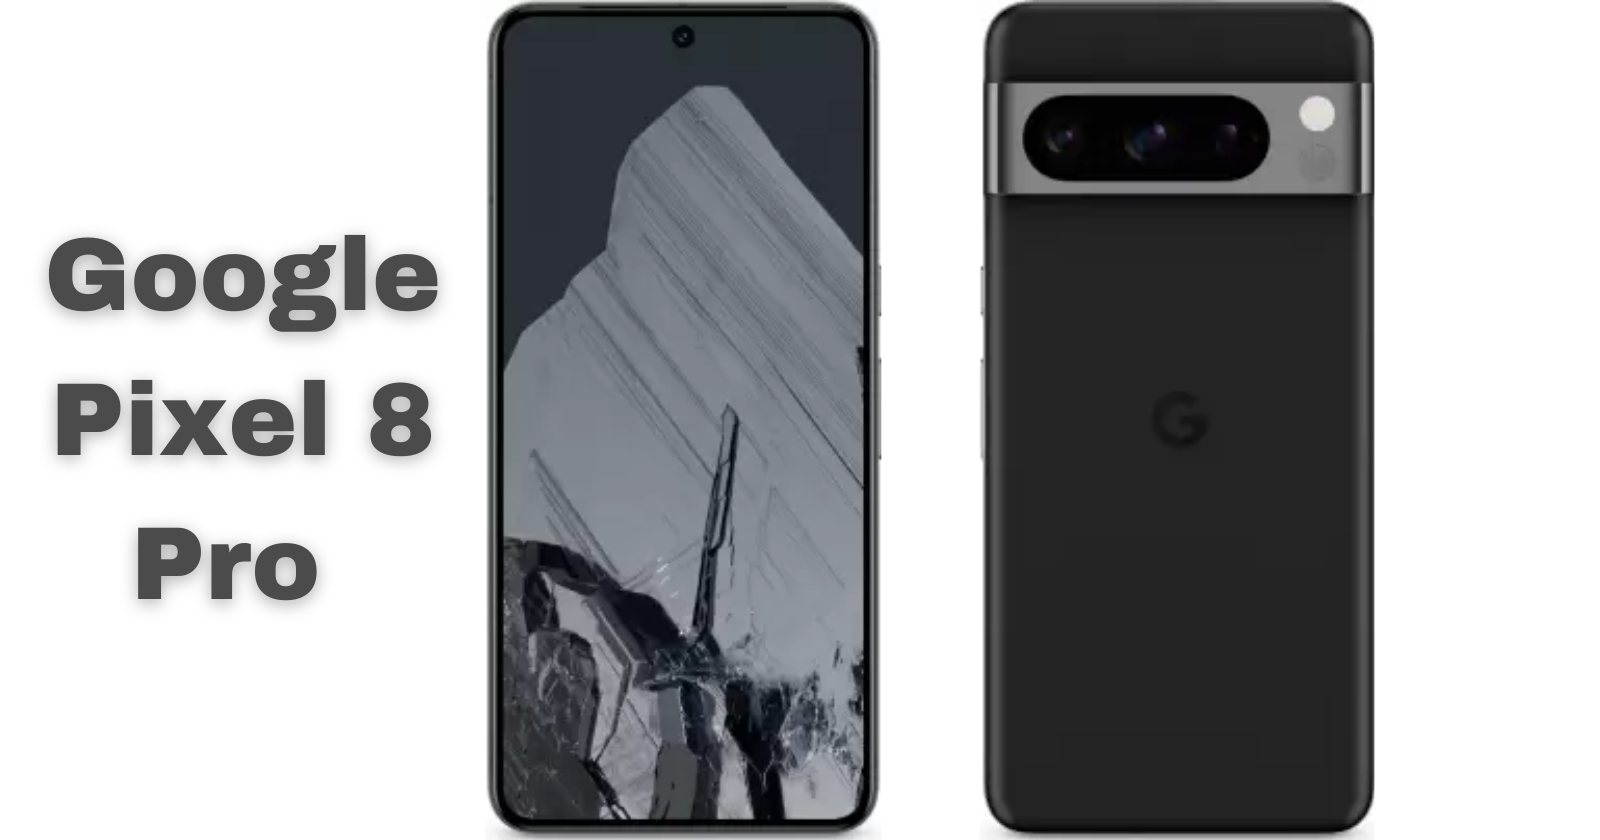 Google offers new 256GB storage variant of Pixel 8 Pro in India: Here are all the details